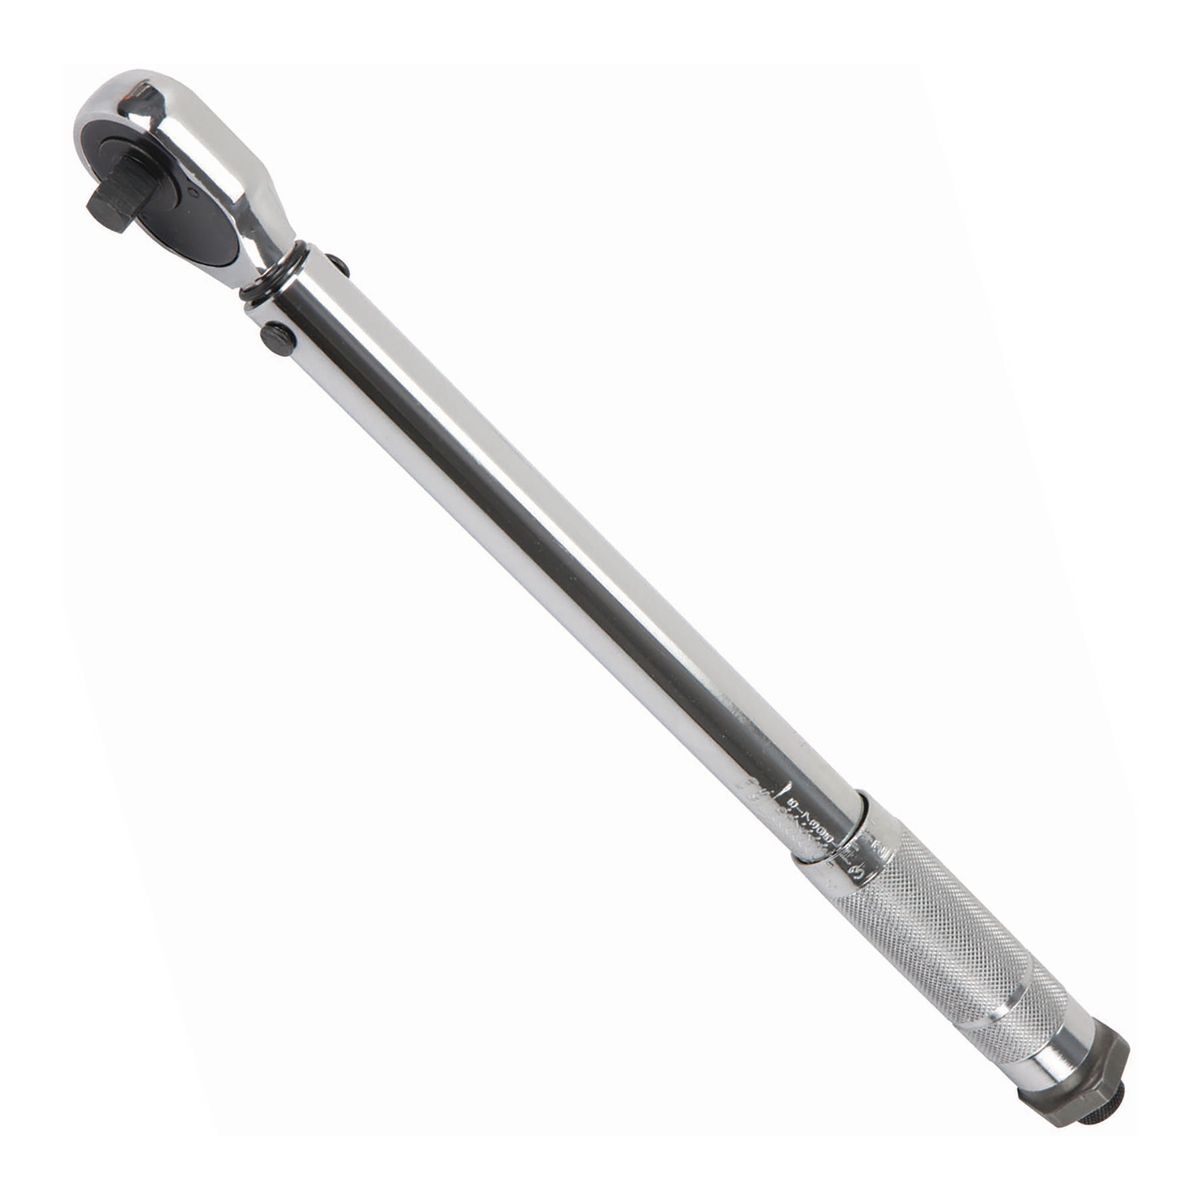 PITTSBURGH 3/8 in. Drive Click Type Torque Wrench - Item 63880 / 61276 / 00807 / 94892